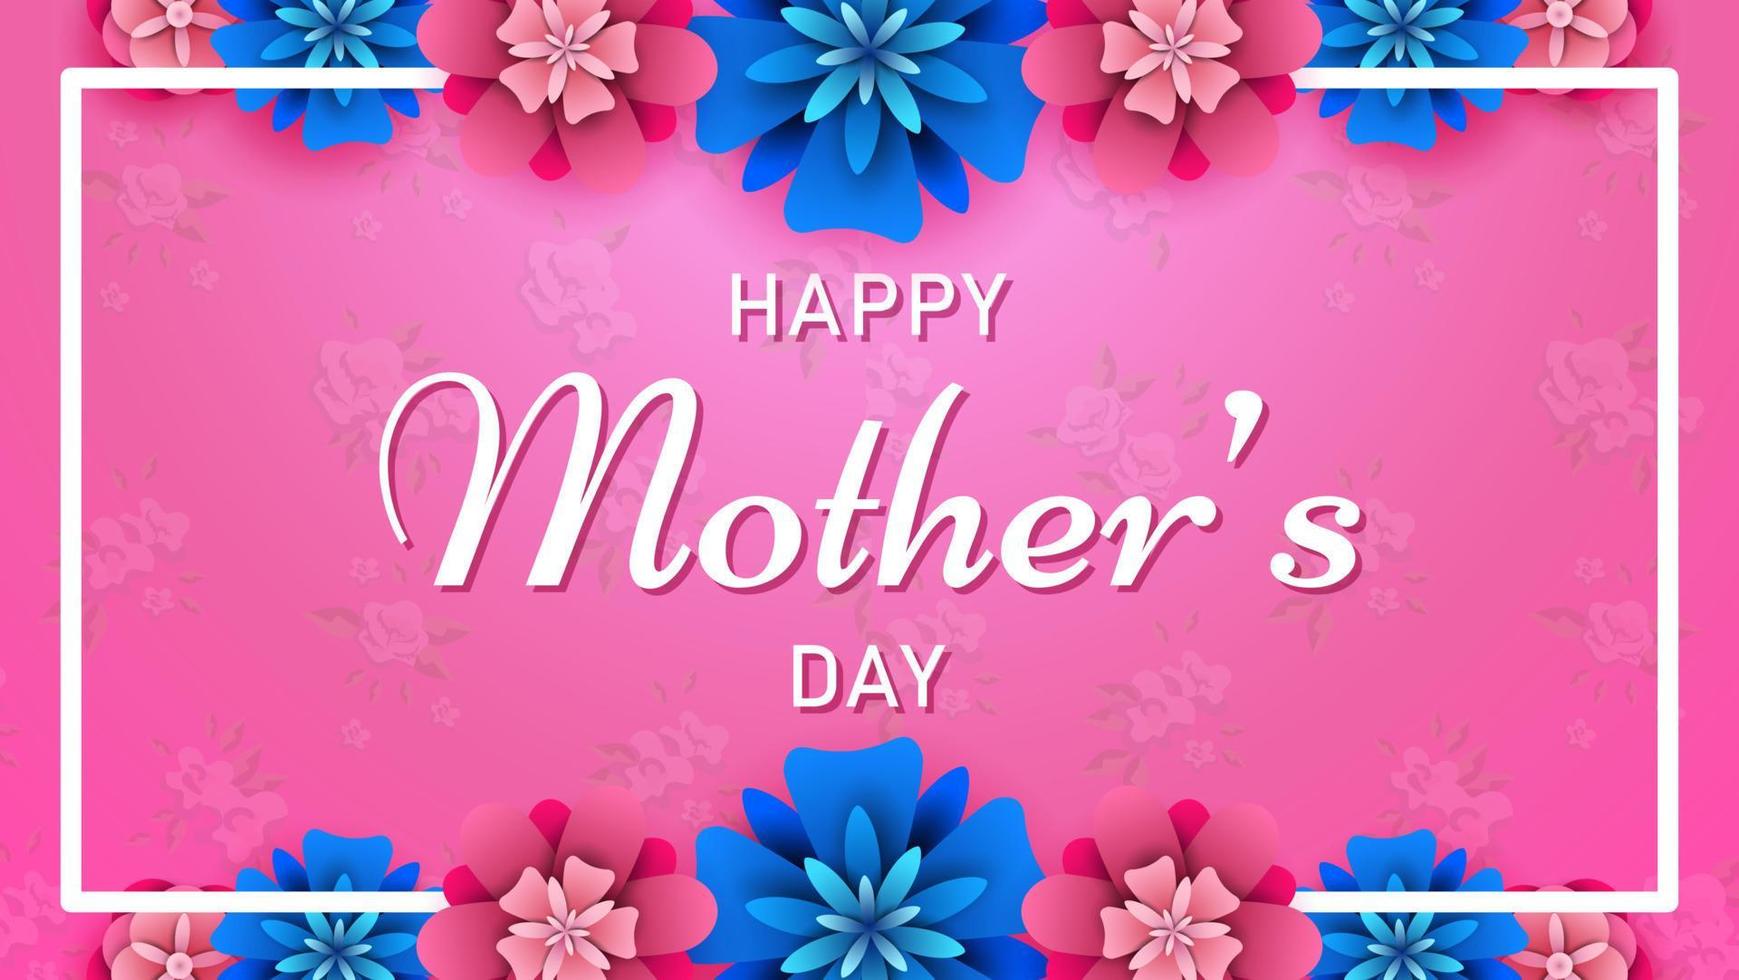 Happy Mother's Day on flowers background vector